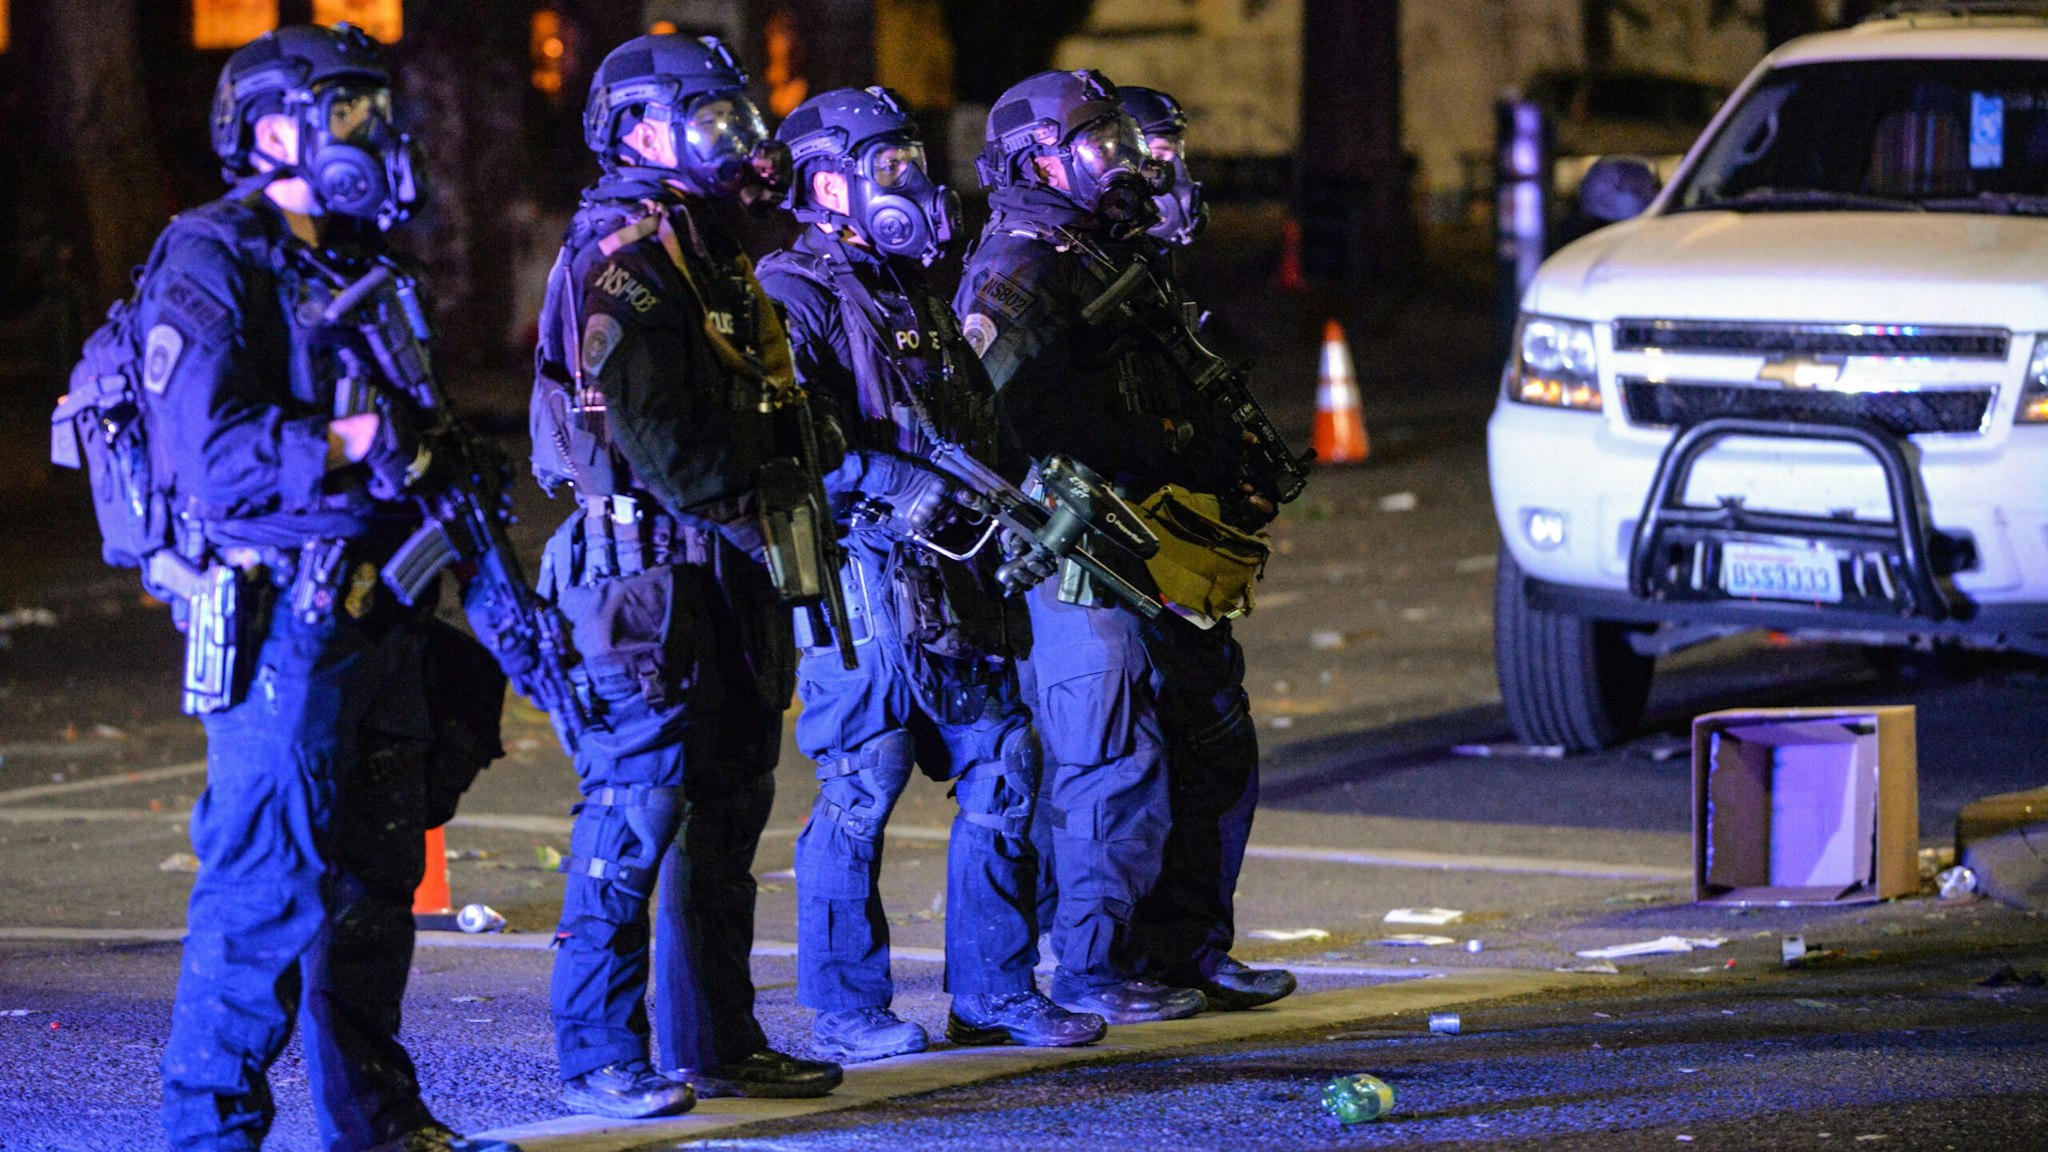 Security officials form a line across a street in Portland, Oregon early July 26, 2020, as protests continue across the United States following the death in Minneapolis of unarmed African-American George Floyd. - Police and federal agents fired tear gas and forcefully dispersed protesters in the US city of Portland, amid President Donald Trump's heavily-criticized "surge" of security forces to major cities. The city, the biggest in the state of Oregon, has seen nightly protests against racism and police brutality for nearly two months, initially sparked by the death of unarmed African American George Floyd at the hands of police in Minnesota